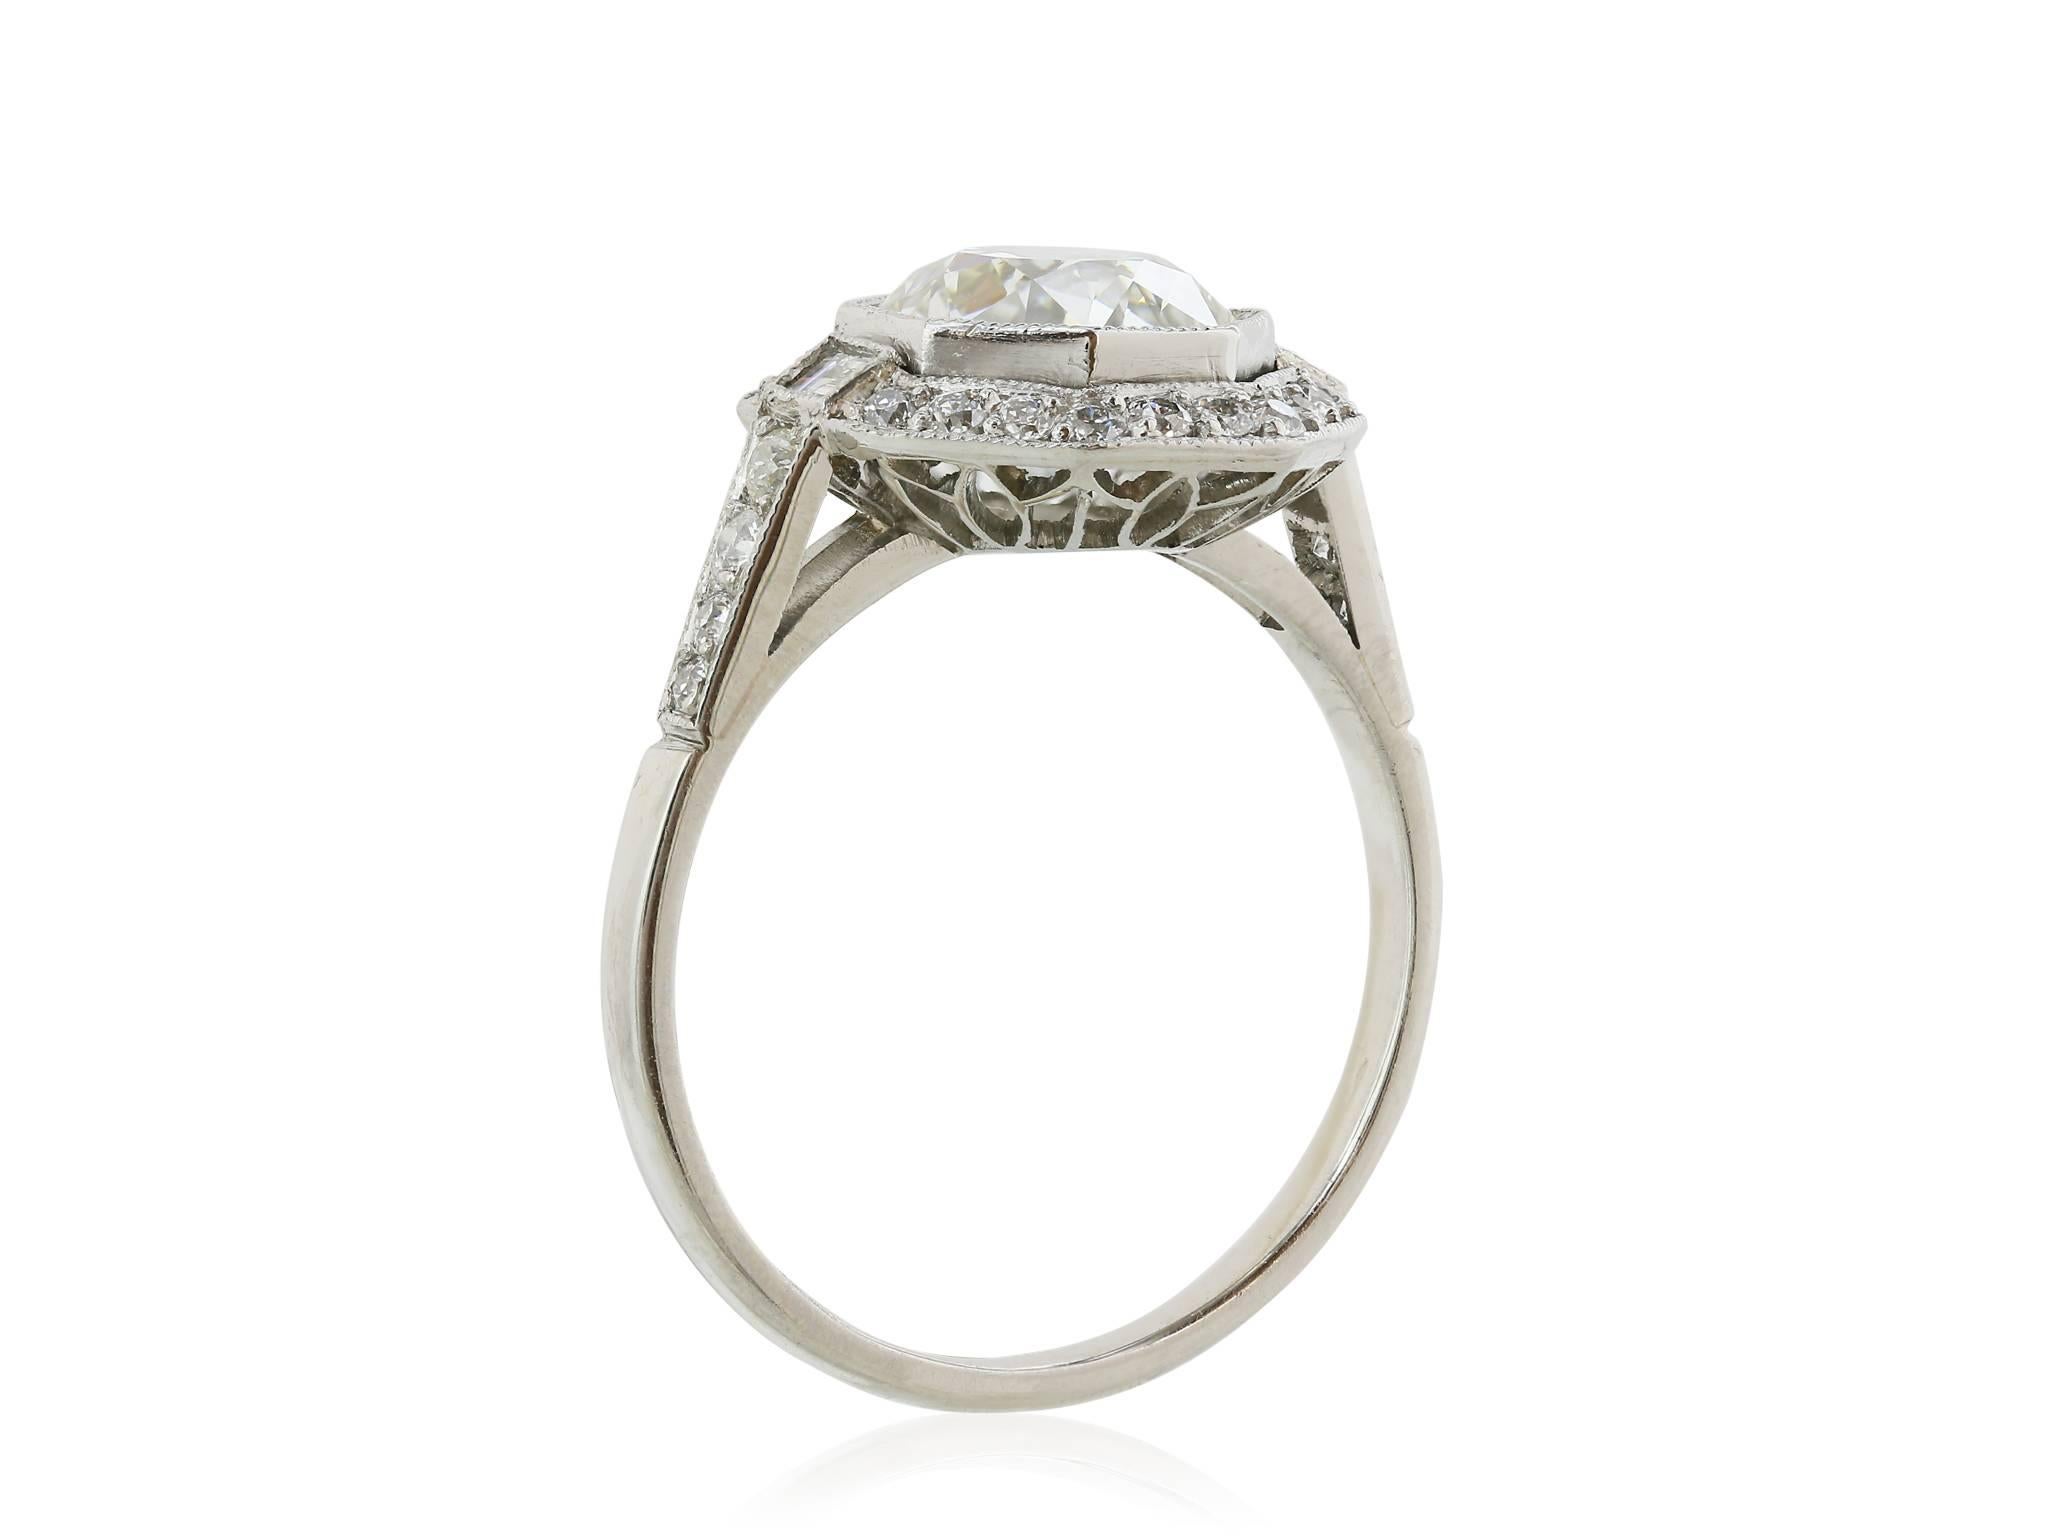 2.18 J/VS2 Carat Diamond Engagement Ring In Excellent Condition For Sale In Chestnut Hill, MA